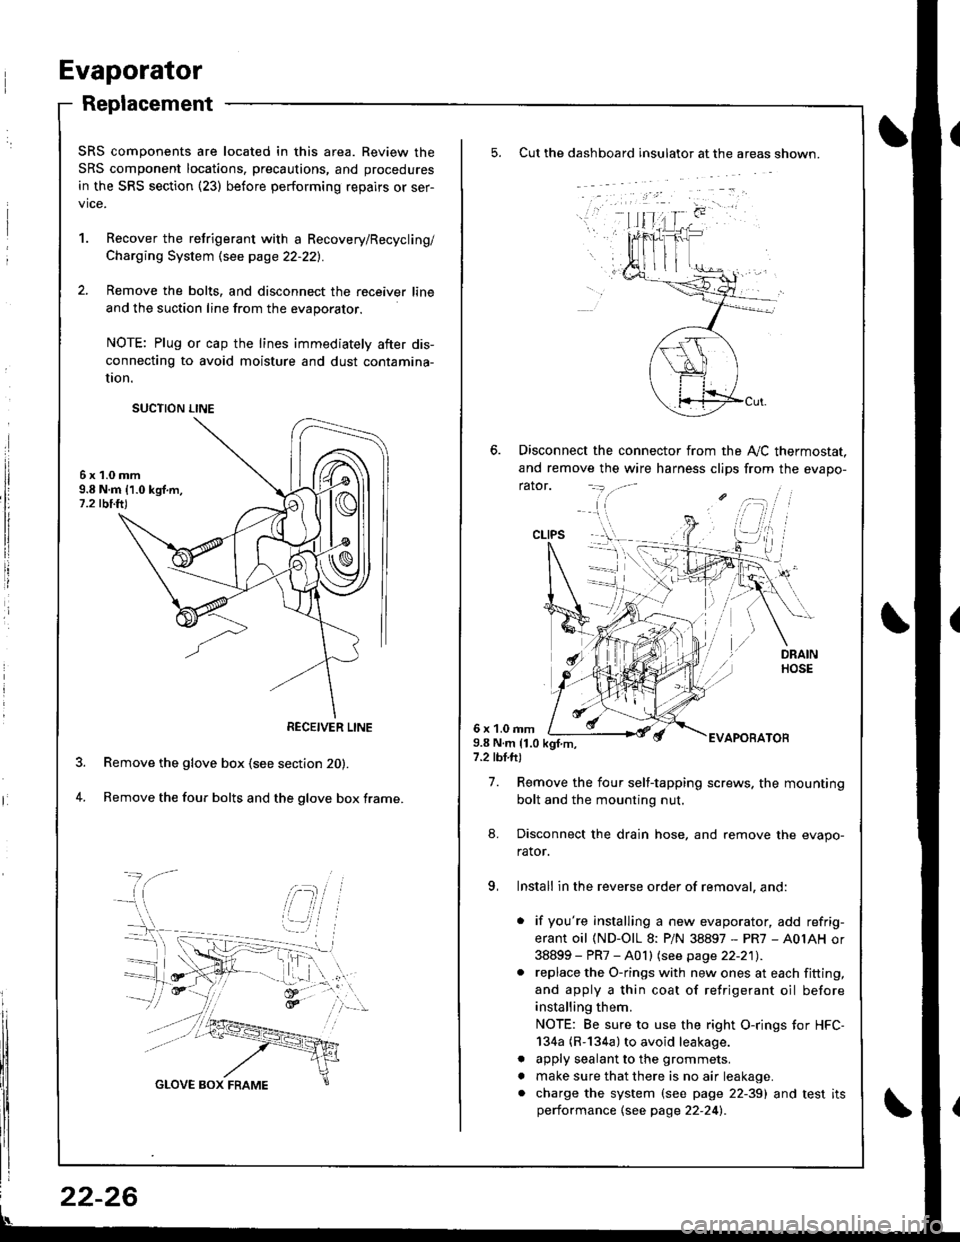 HONDA INTEGRA 1998 4.G Workshop Manual Evaporator
Replacement
Cut the dashboard insulato. at the areas shown.
Disconnect the connector from the A,,/C thermostat.
and remove the wire harness clips from the evapo-
rator.
6 x 1.0 rnm9.8 N.m 1